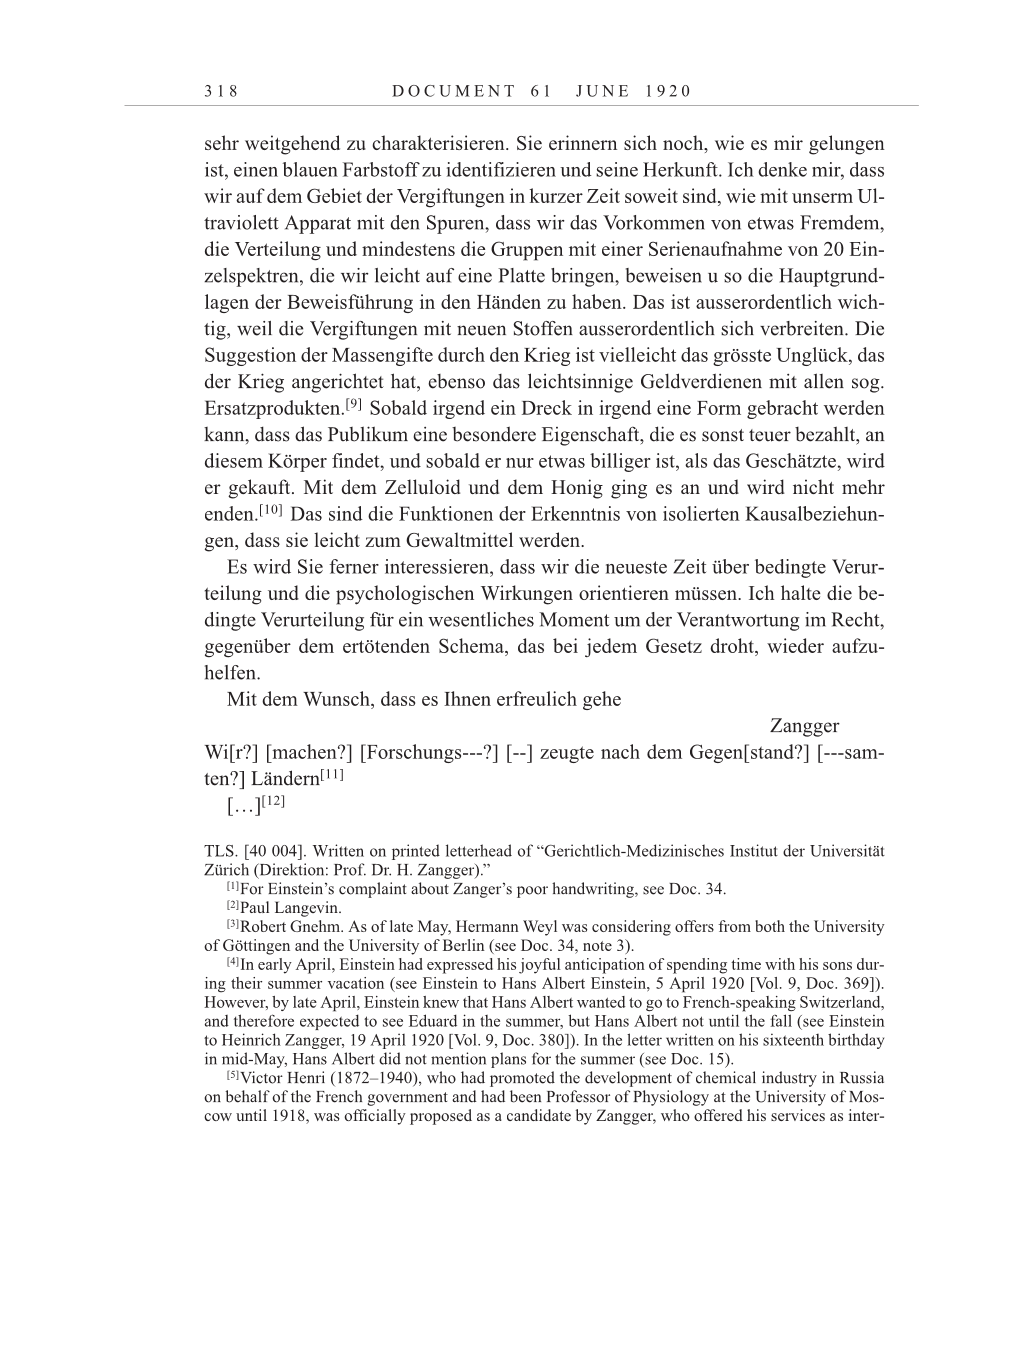 Volume 10: The Berlin Years: Correspondence May-December 1920 / Supplementary Correspondence 1909-1920 page 318